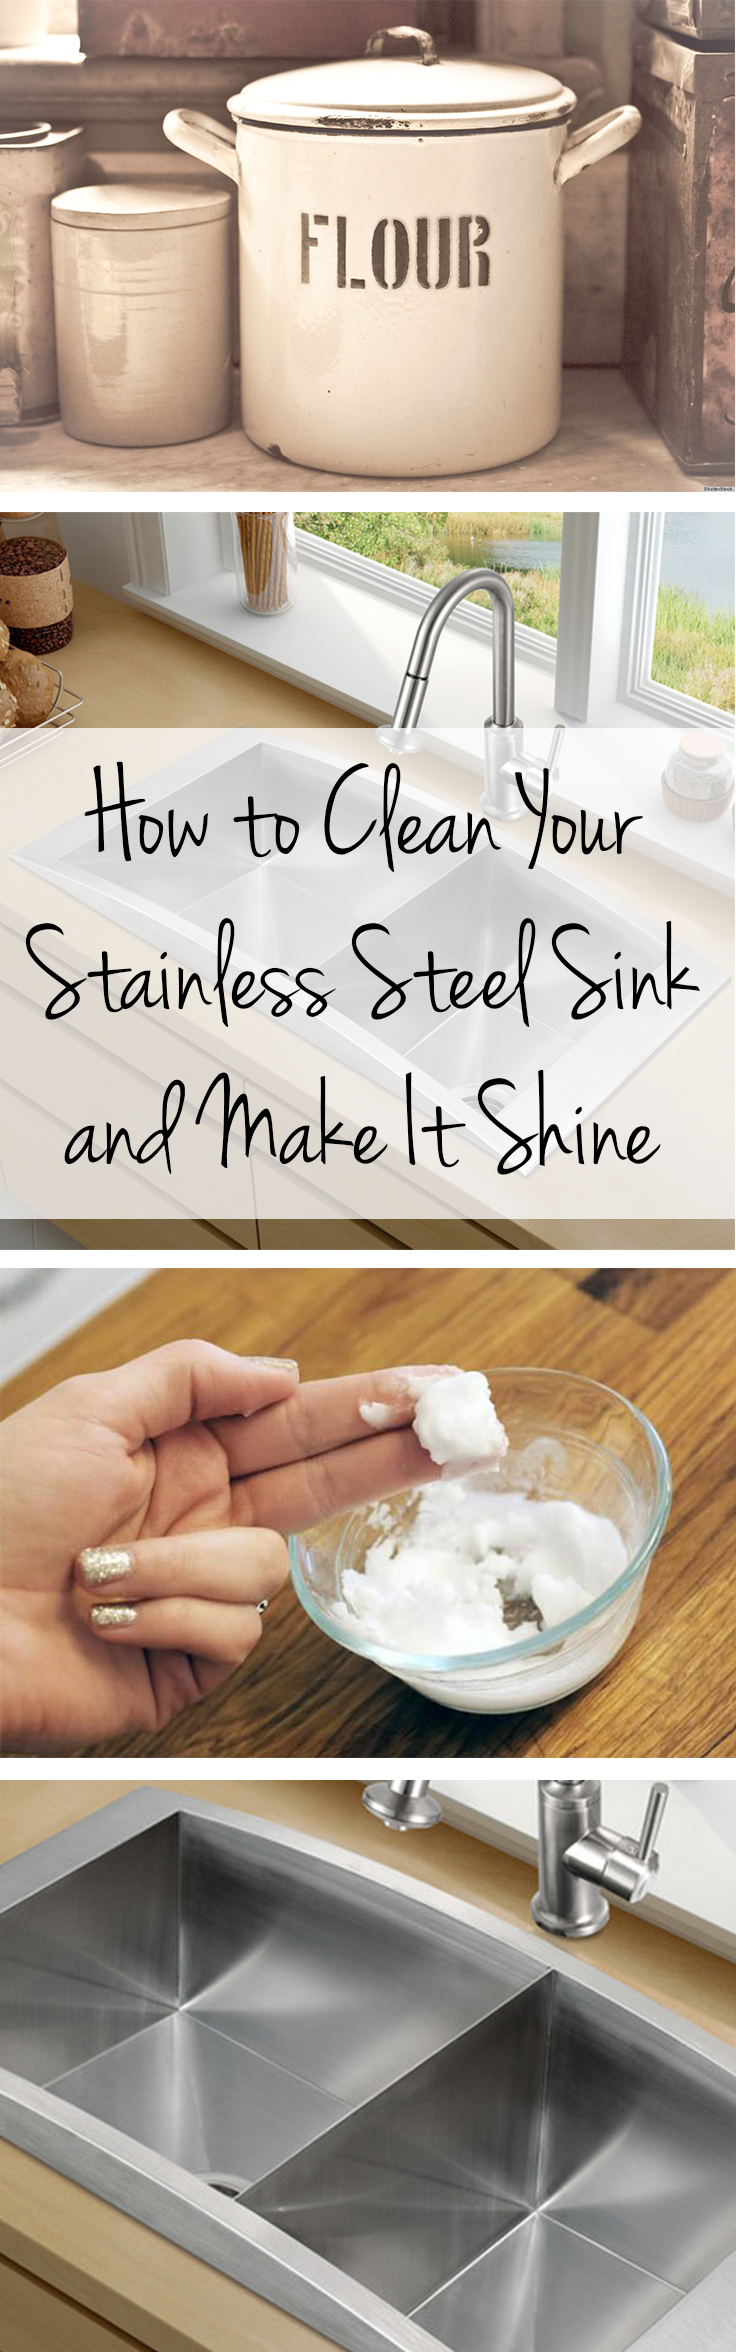 Cleaning, cleaning stainless steel, stainless steel, cleaning tips, cleaning hacks, popular pin, clean home, clean kitchens.